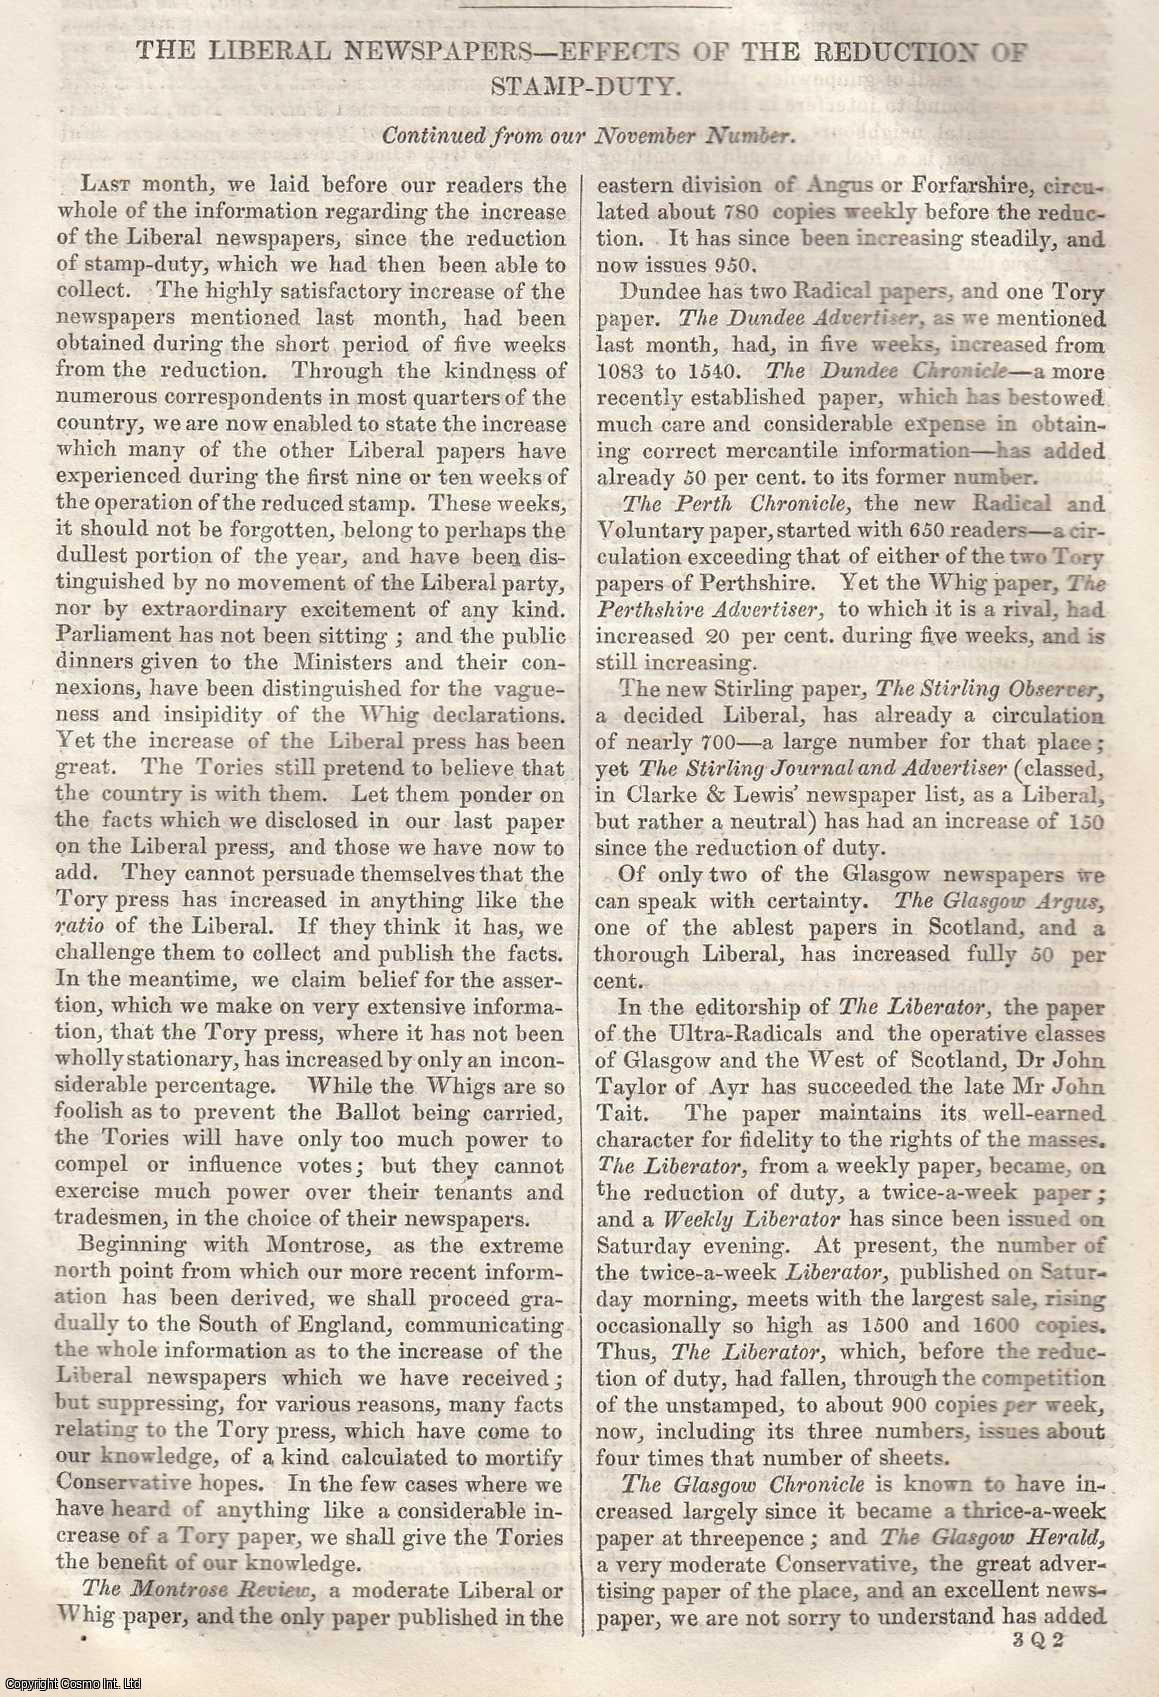 Darling, J. J. - The Liberal Newspapers: Effects of The Reduction of Stamp-Duty (No. 2, concluded.) An original article from Tait's Edinburgh Magazine, 1836.